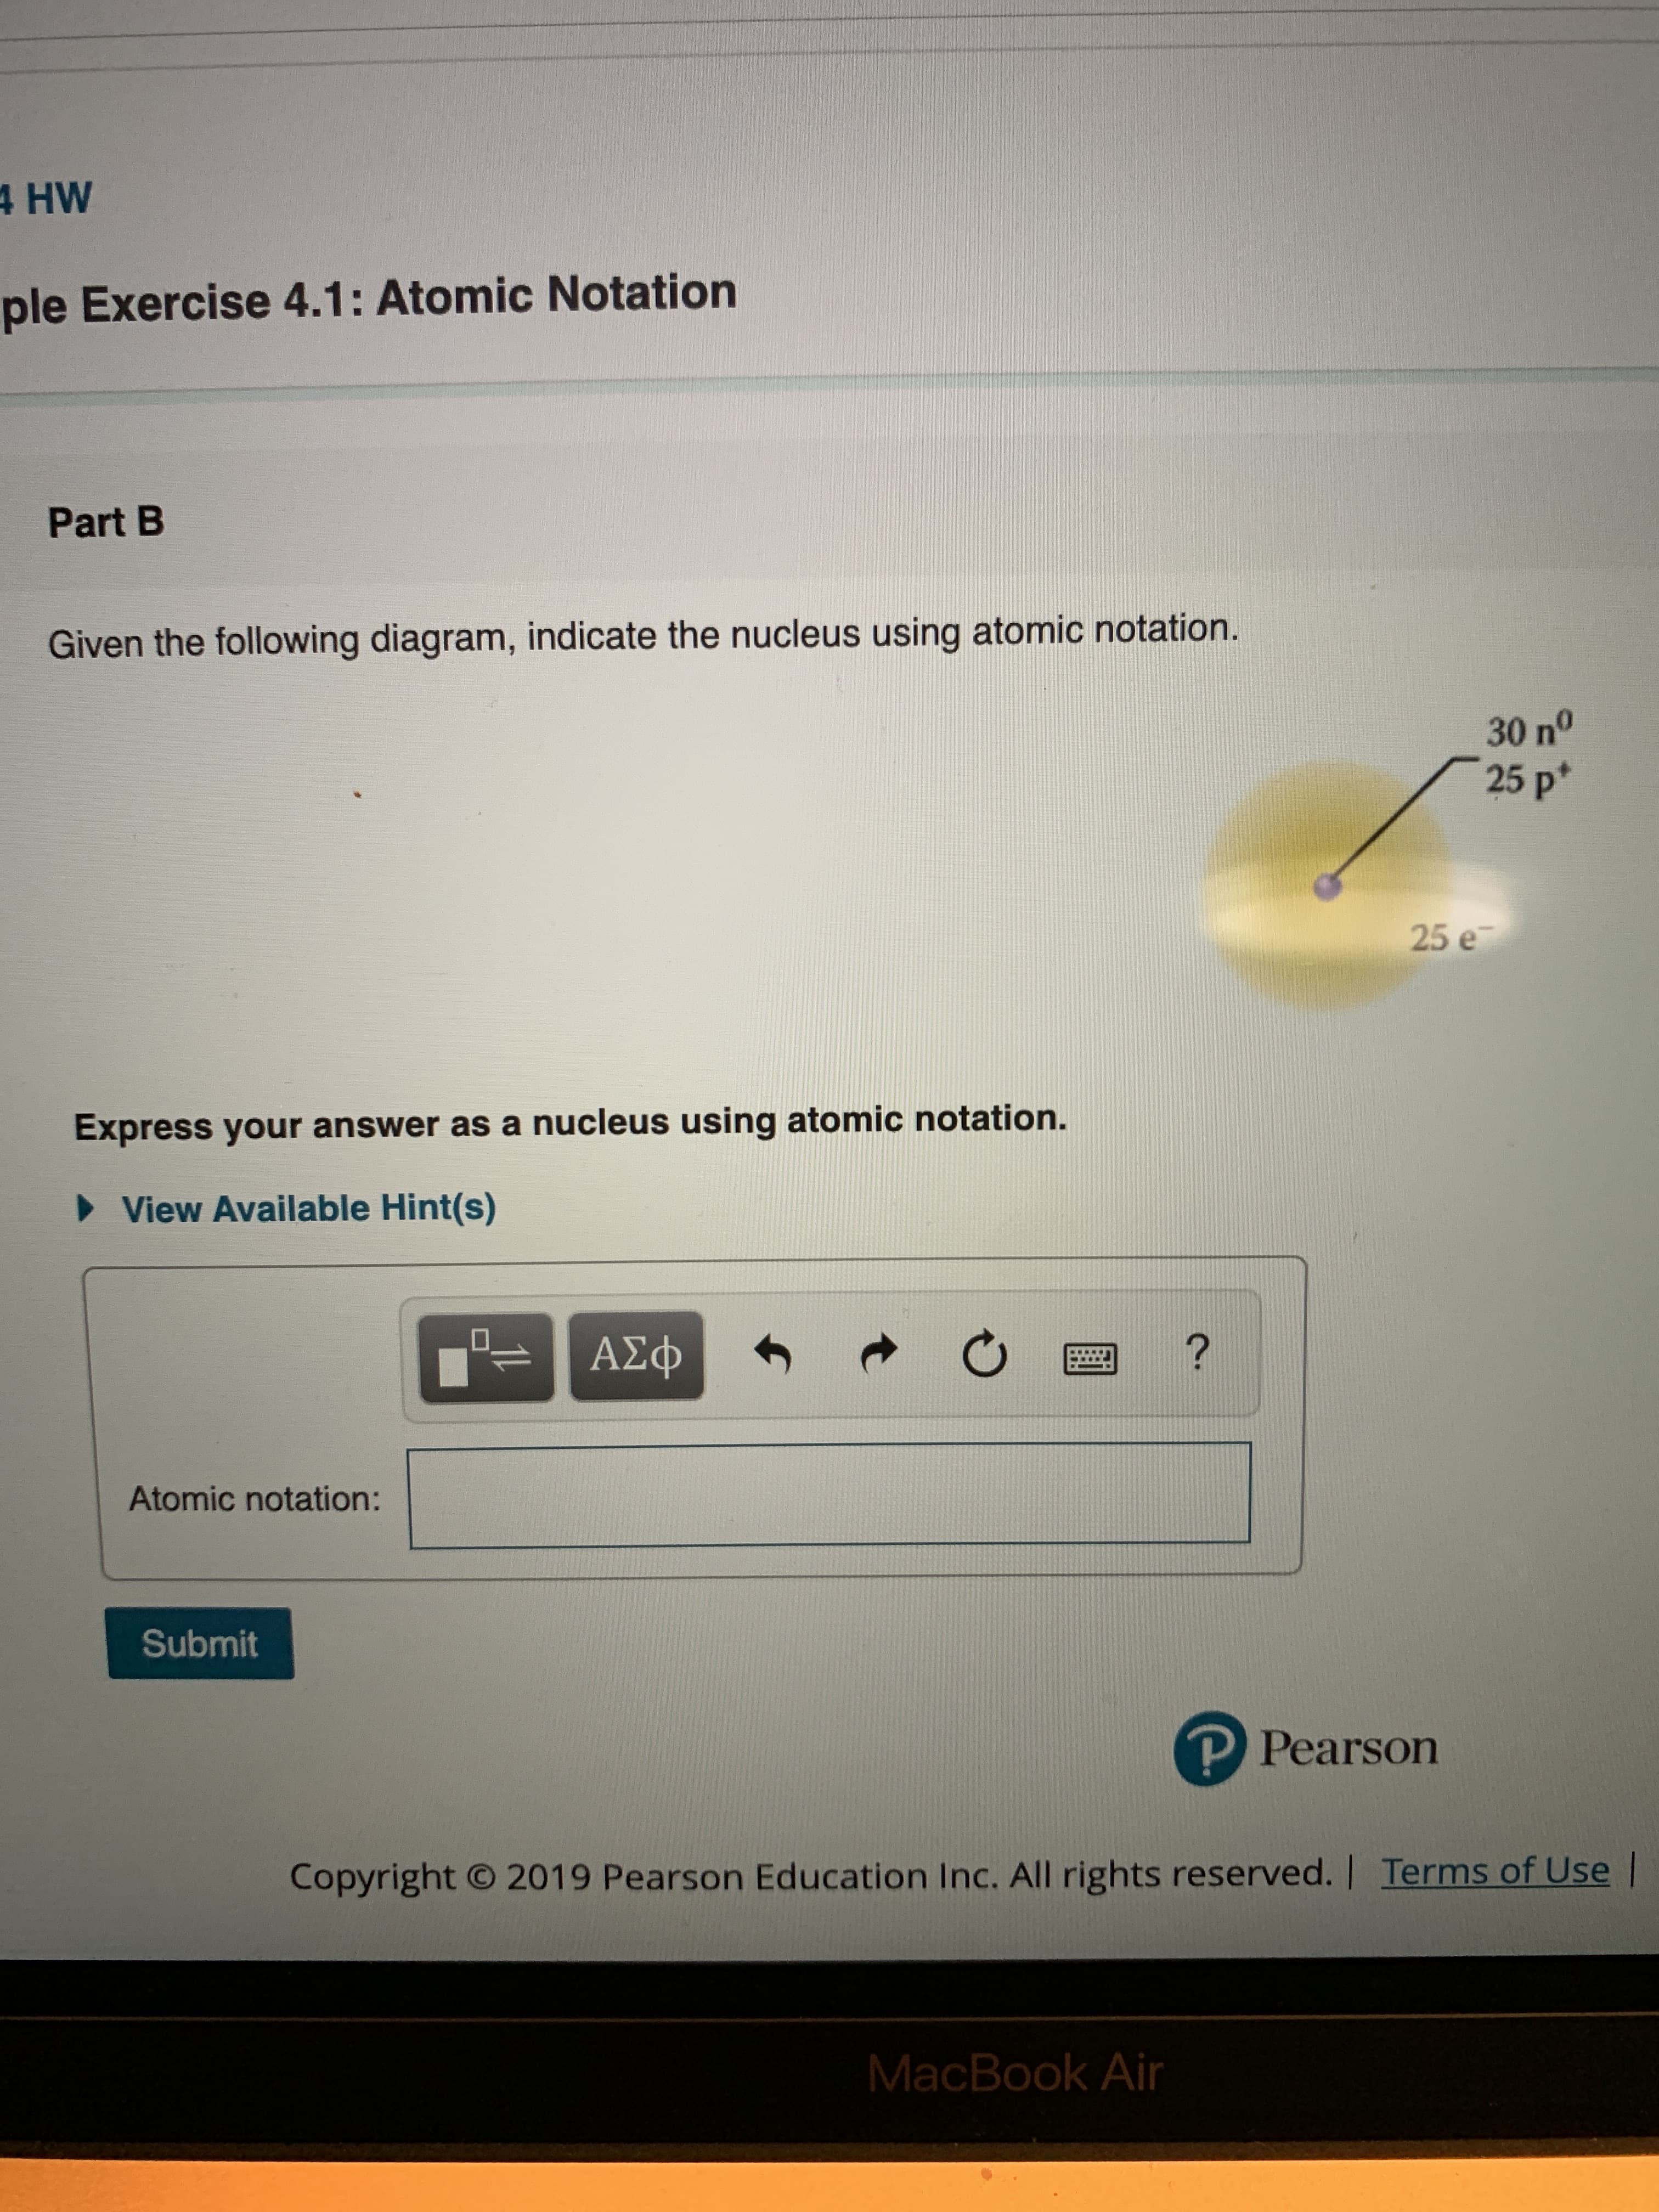 4 HW
ple Exercise 4.1: Atomic Notation
Part B
Given the following diagram, indicate the nucleus using atomic notation.
30 n°
25 p*
25 e
Express your answer as a nucleus using atomic notation.
View Available Hint(s)
-ΑΣφ
?
Atomic notation:
Submit
P Pearson
2019 Pearson Education Inc. All rights reserved. | Terms of Use
Copyright
MacBook Air
t
